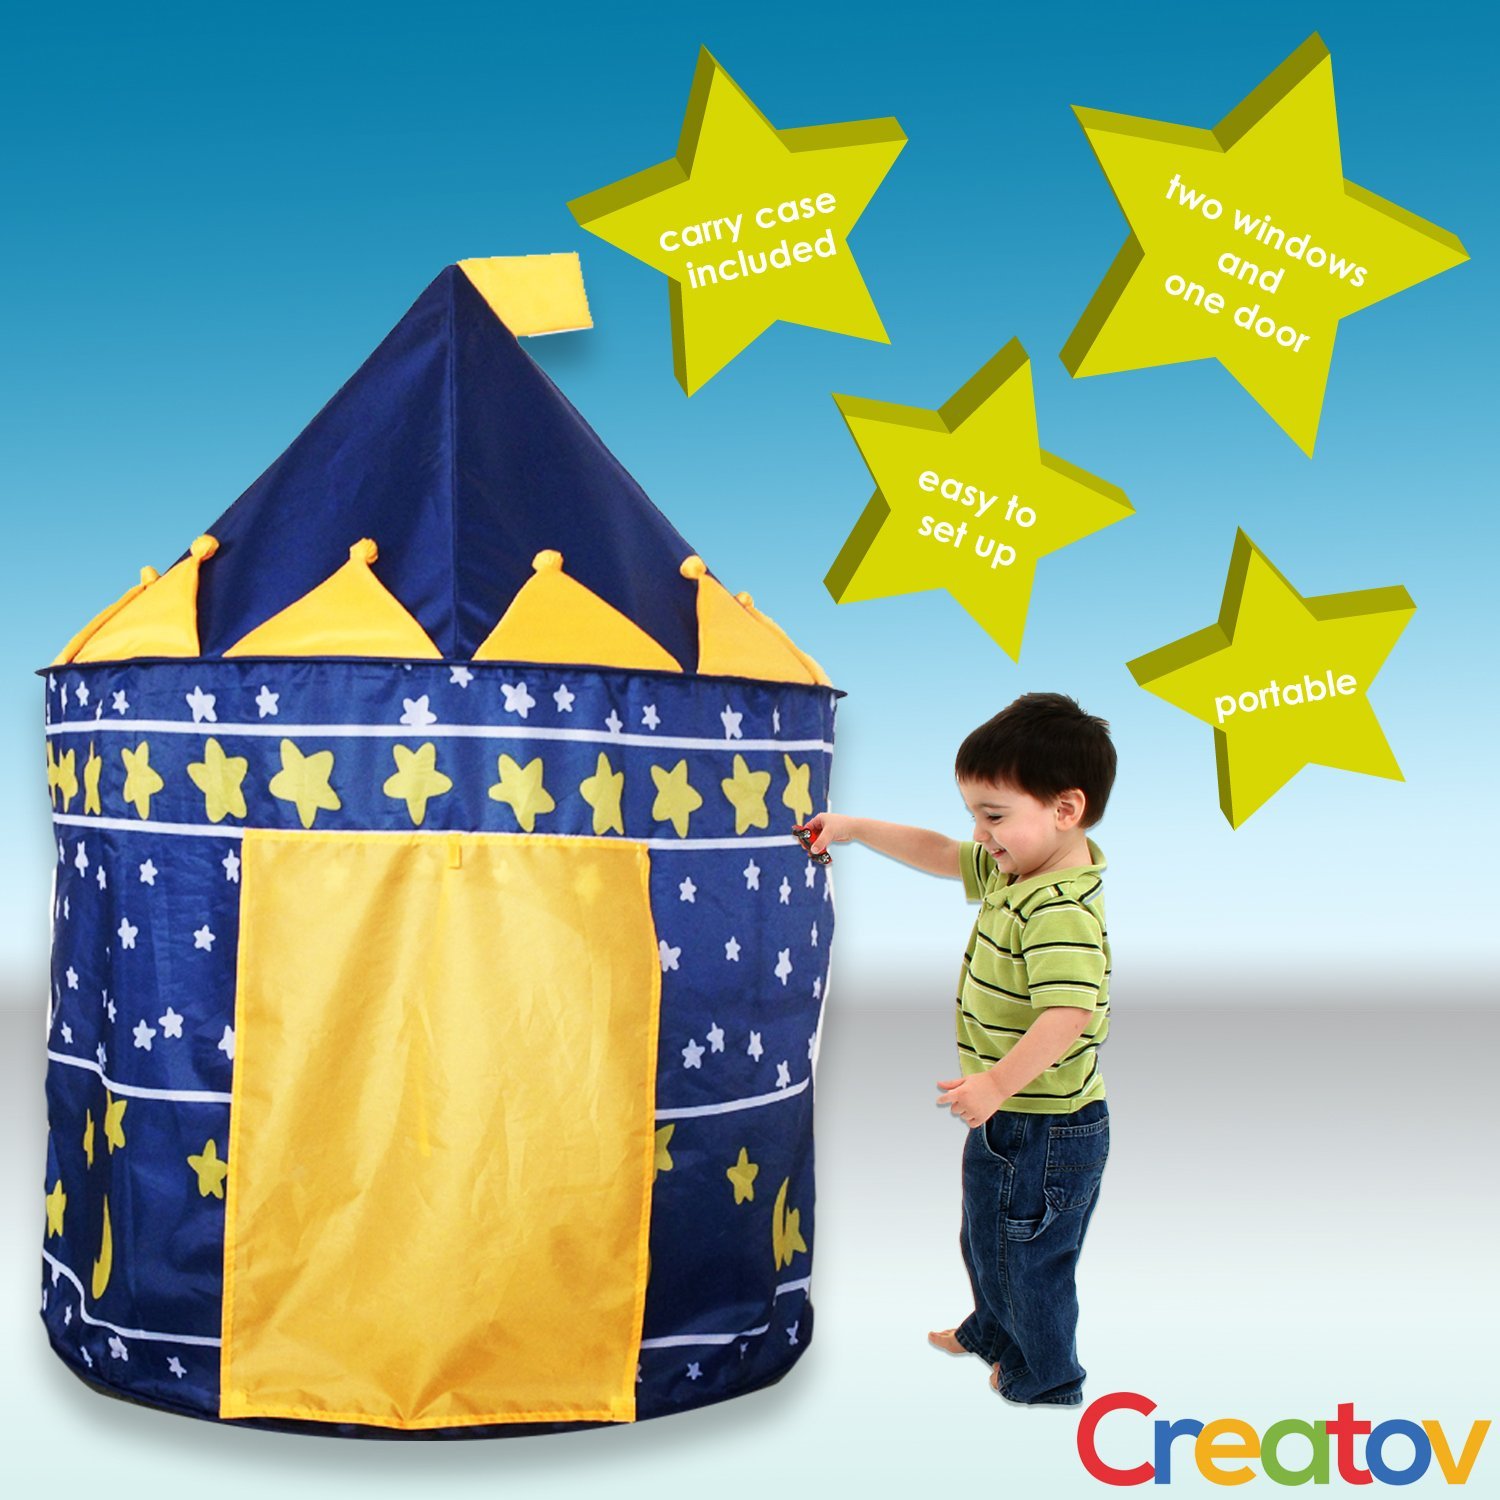 Children Play Tent Boys Girls Prince House Indoor Outdoor Blue Foldable Tent with Case by Creatov - image 2 of 2